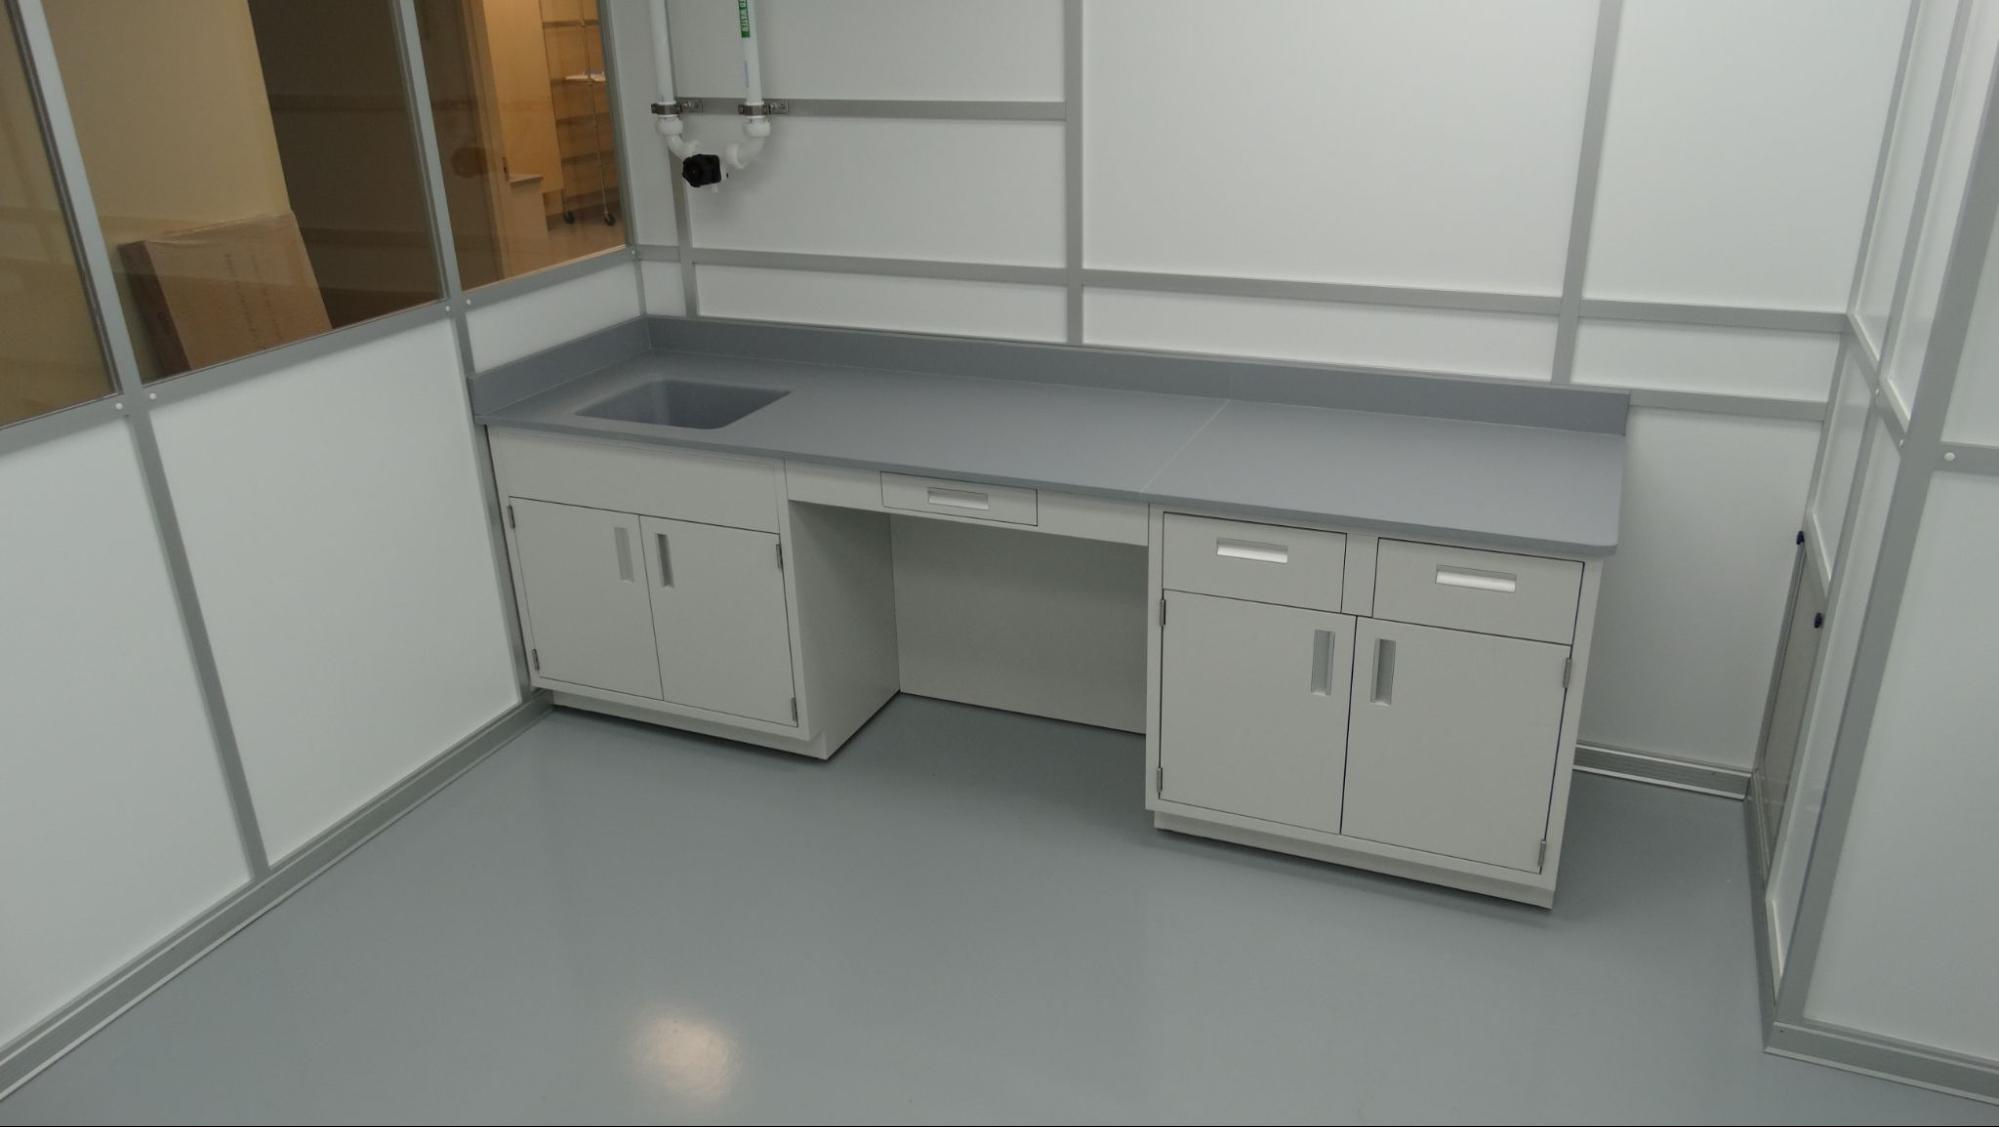 Sitting height cabinets